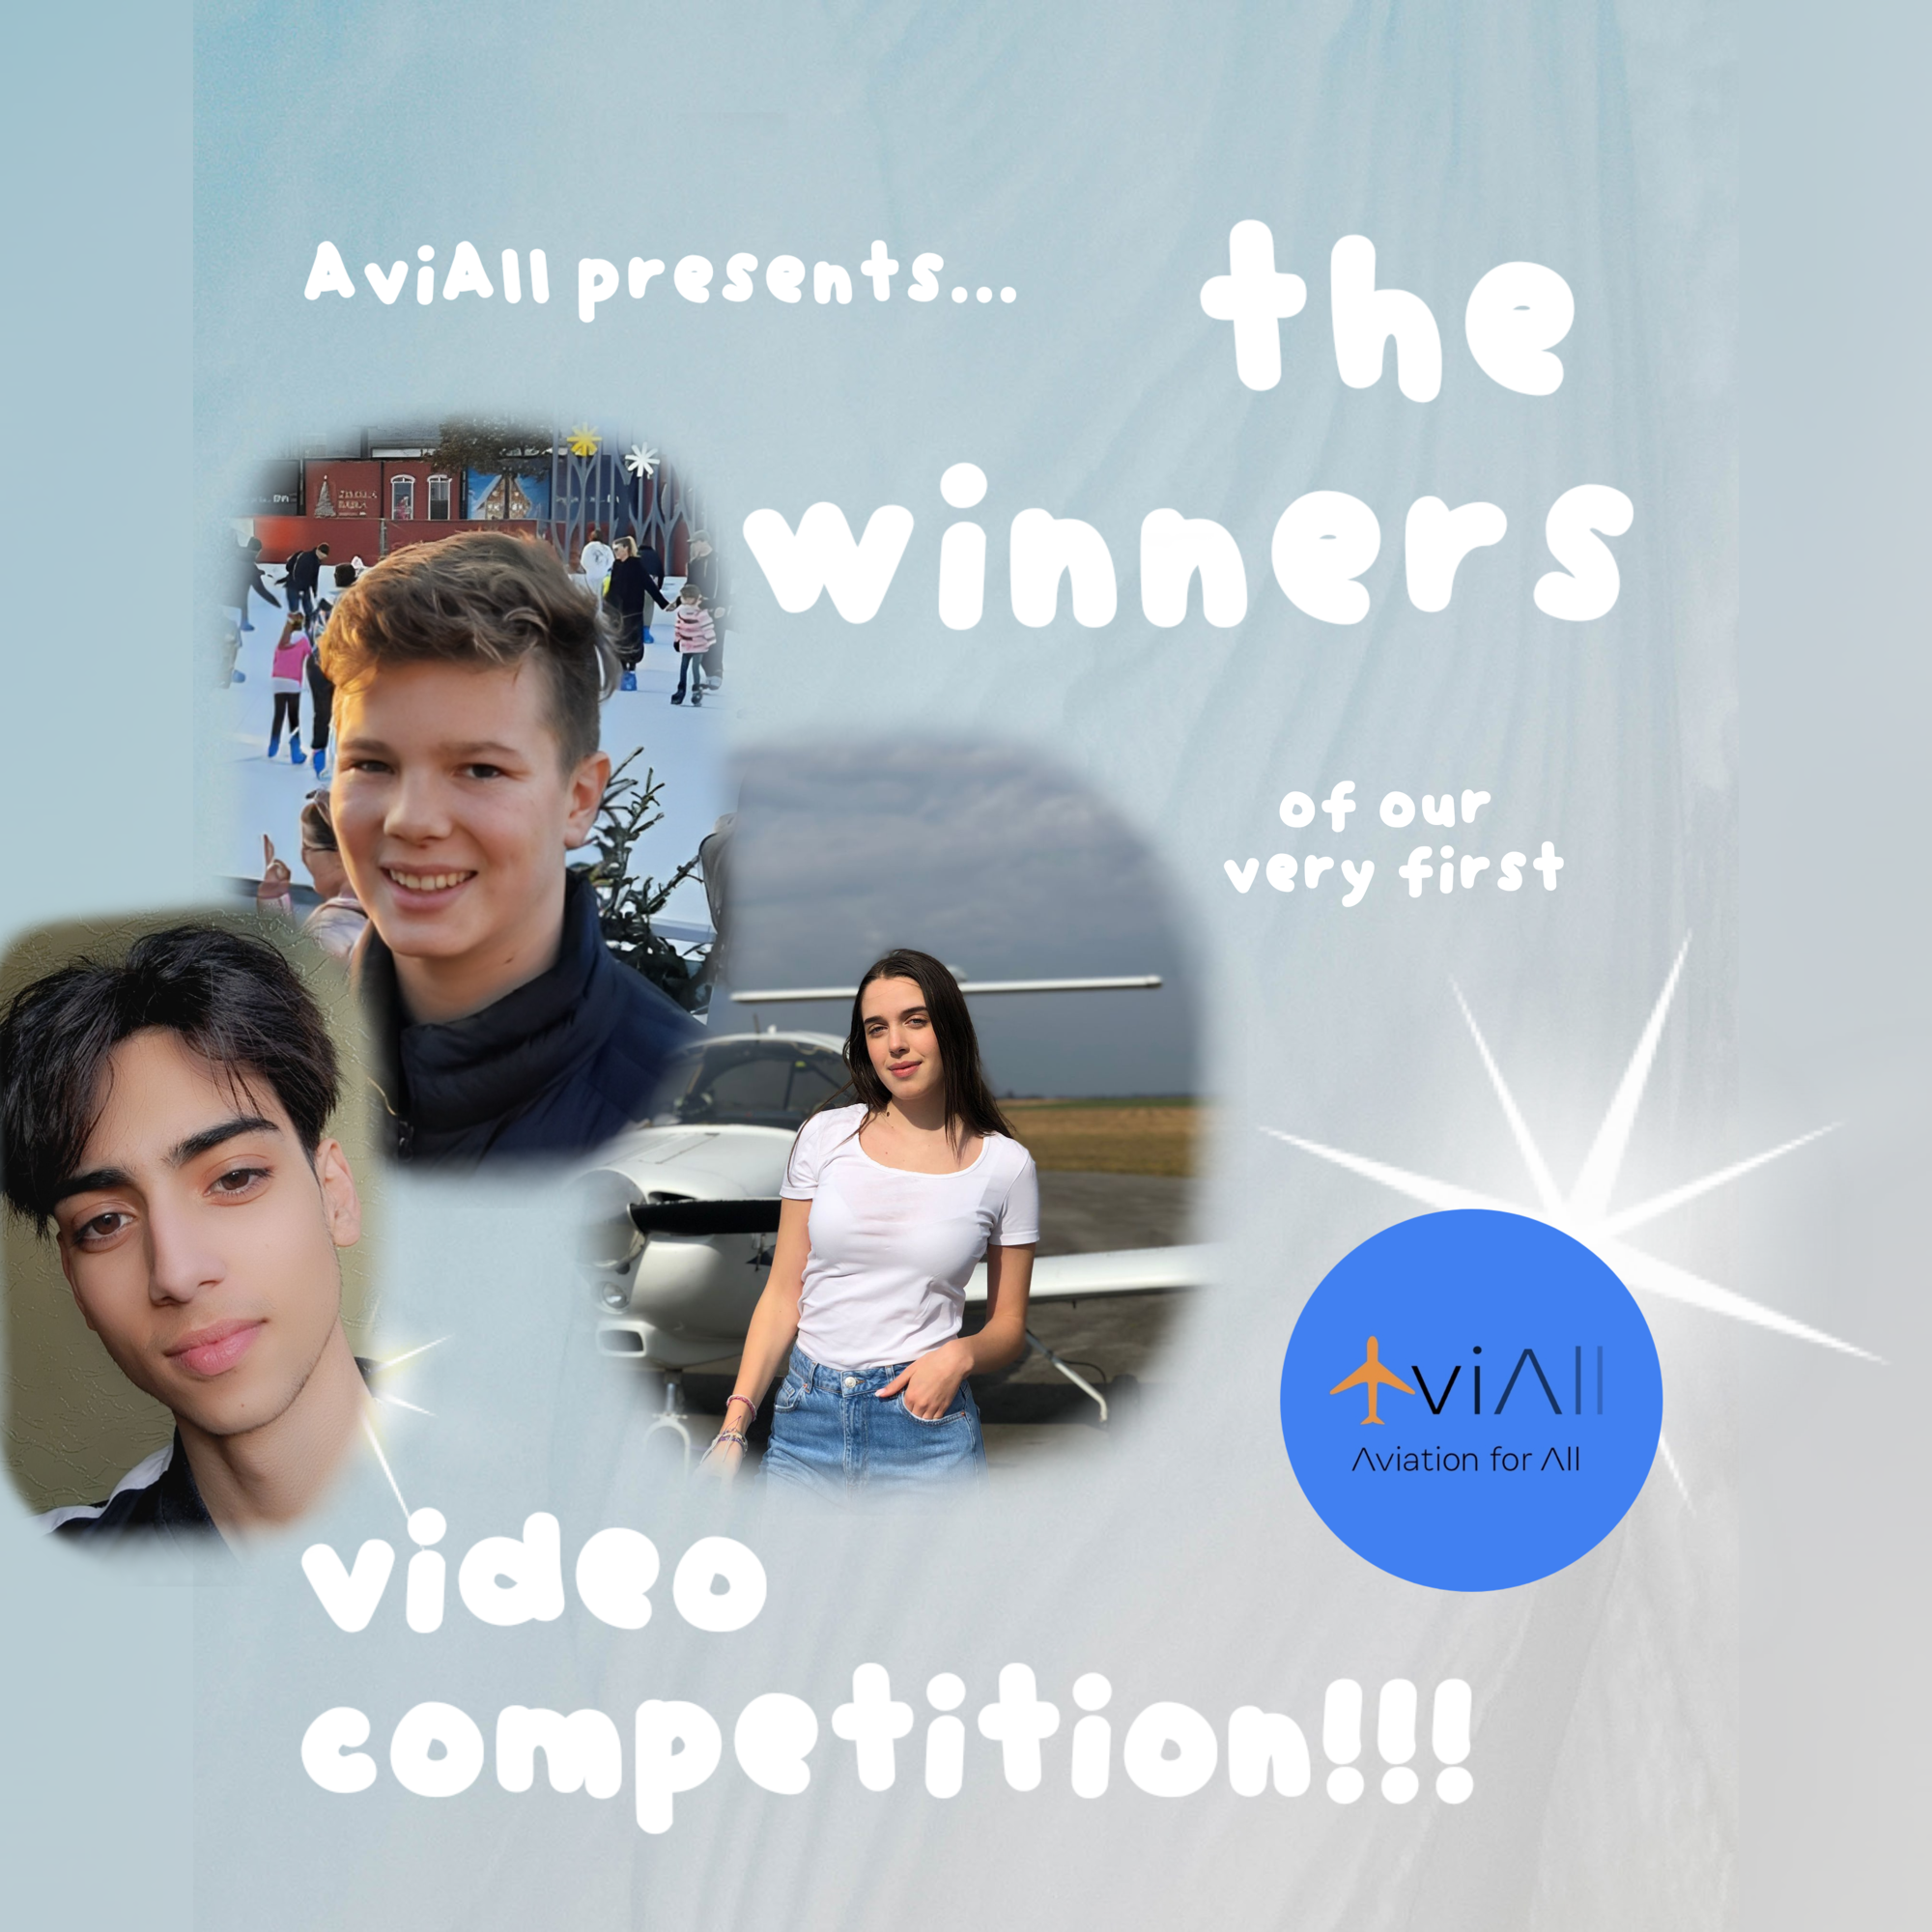 Our first video competition awards the three amazing young people! 